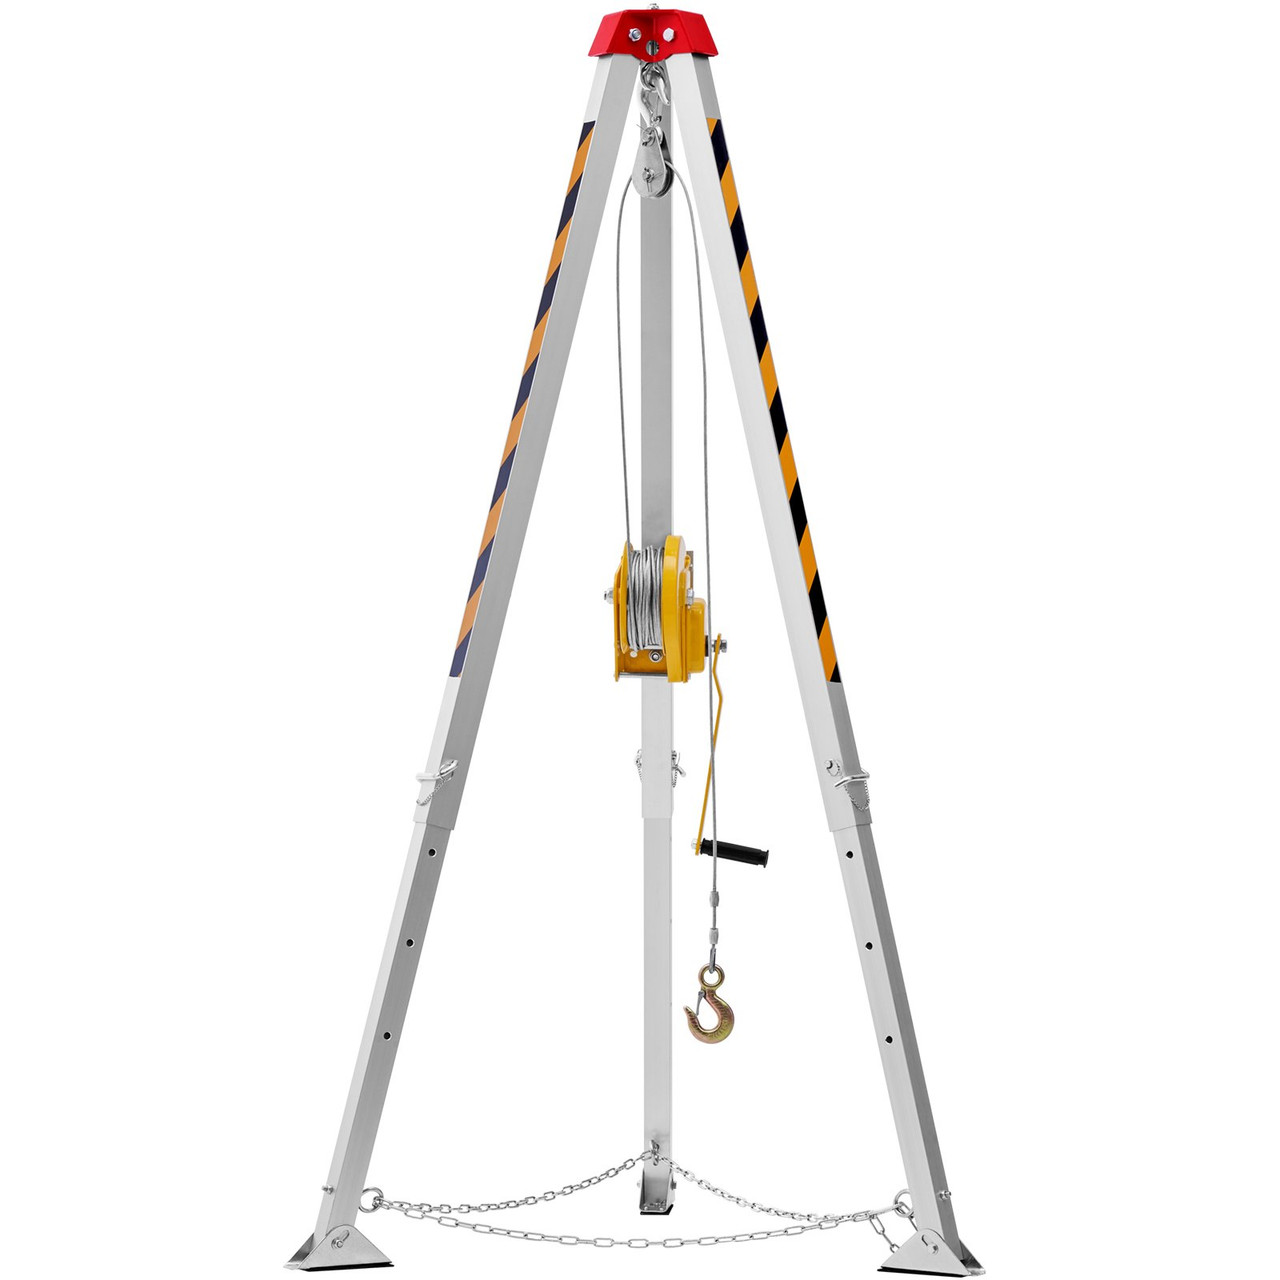 VEVOR Confined Space Tripod Kit, 1800 lbs Winch, Confined Space Tripod 7' Legs and 98' Cable, Confined Space Rescue Tripod 32.8' Fall Protection, Harness, Storage Bag for Traditional Confined Spaces